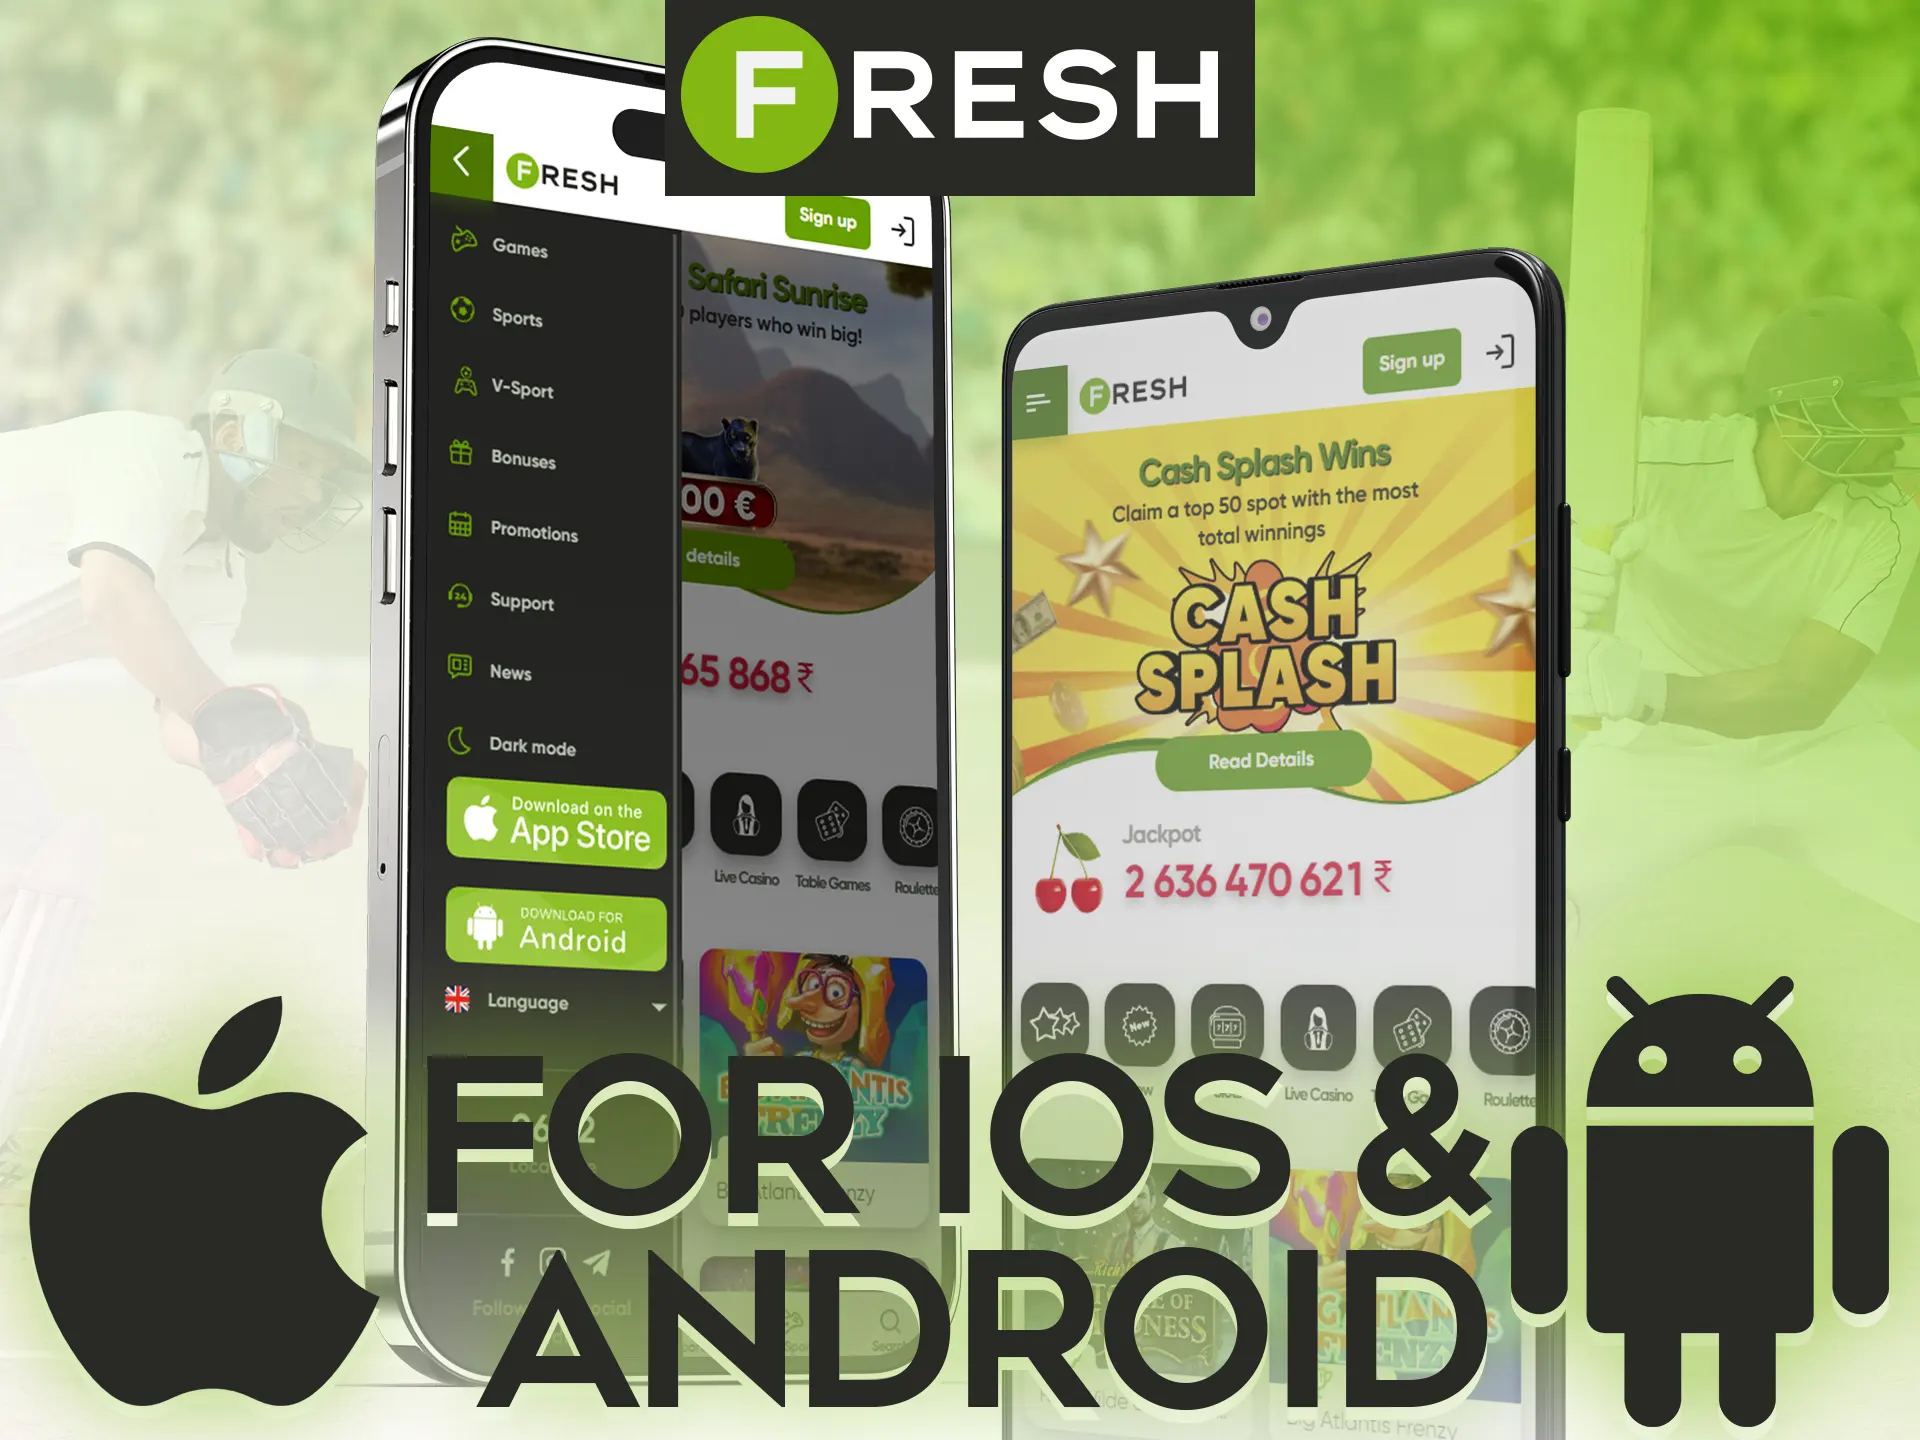 You can download Fresh Casino app on Android and iOS phones.